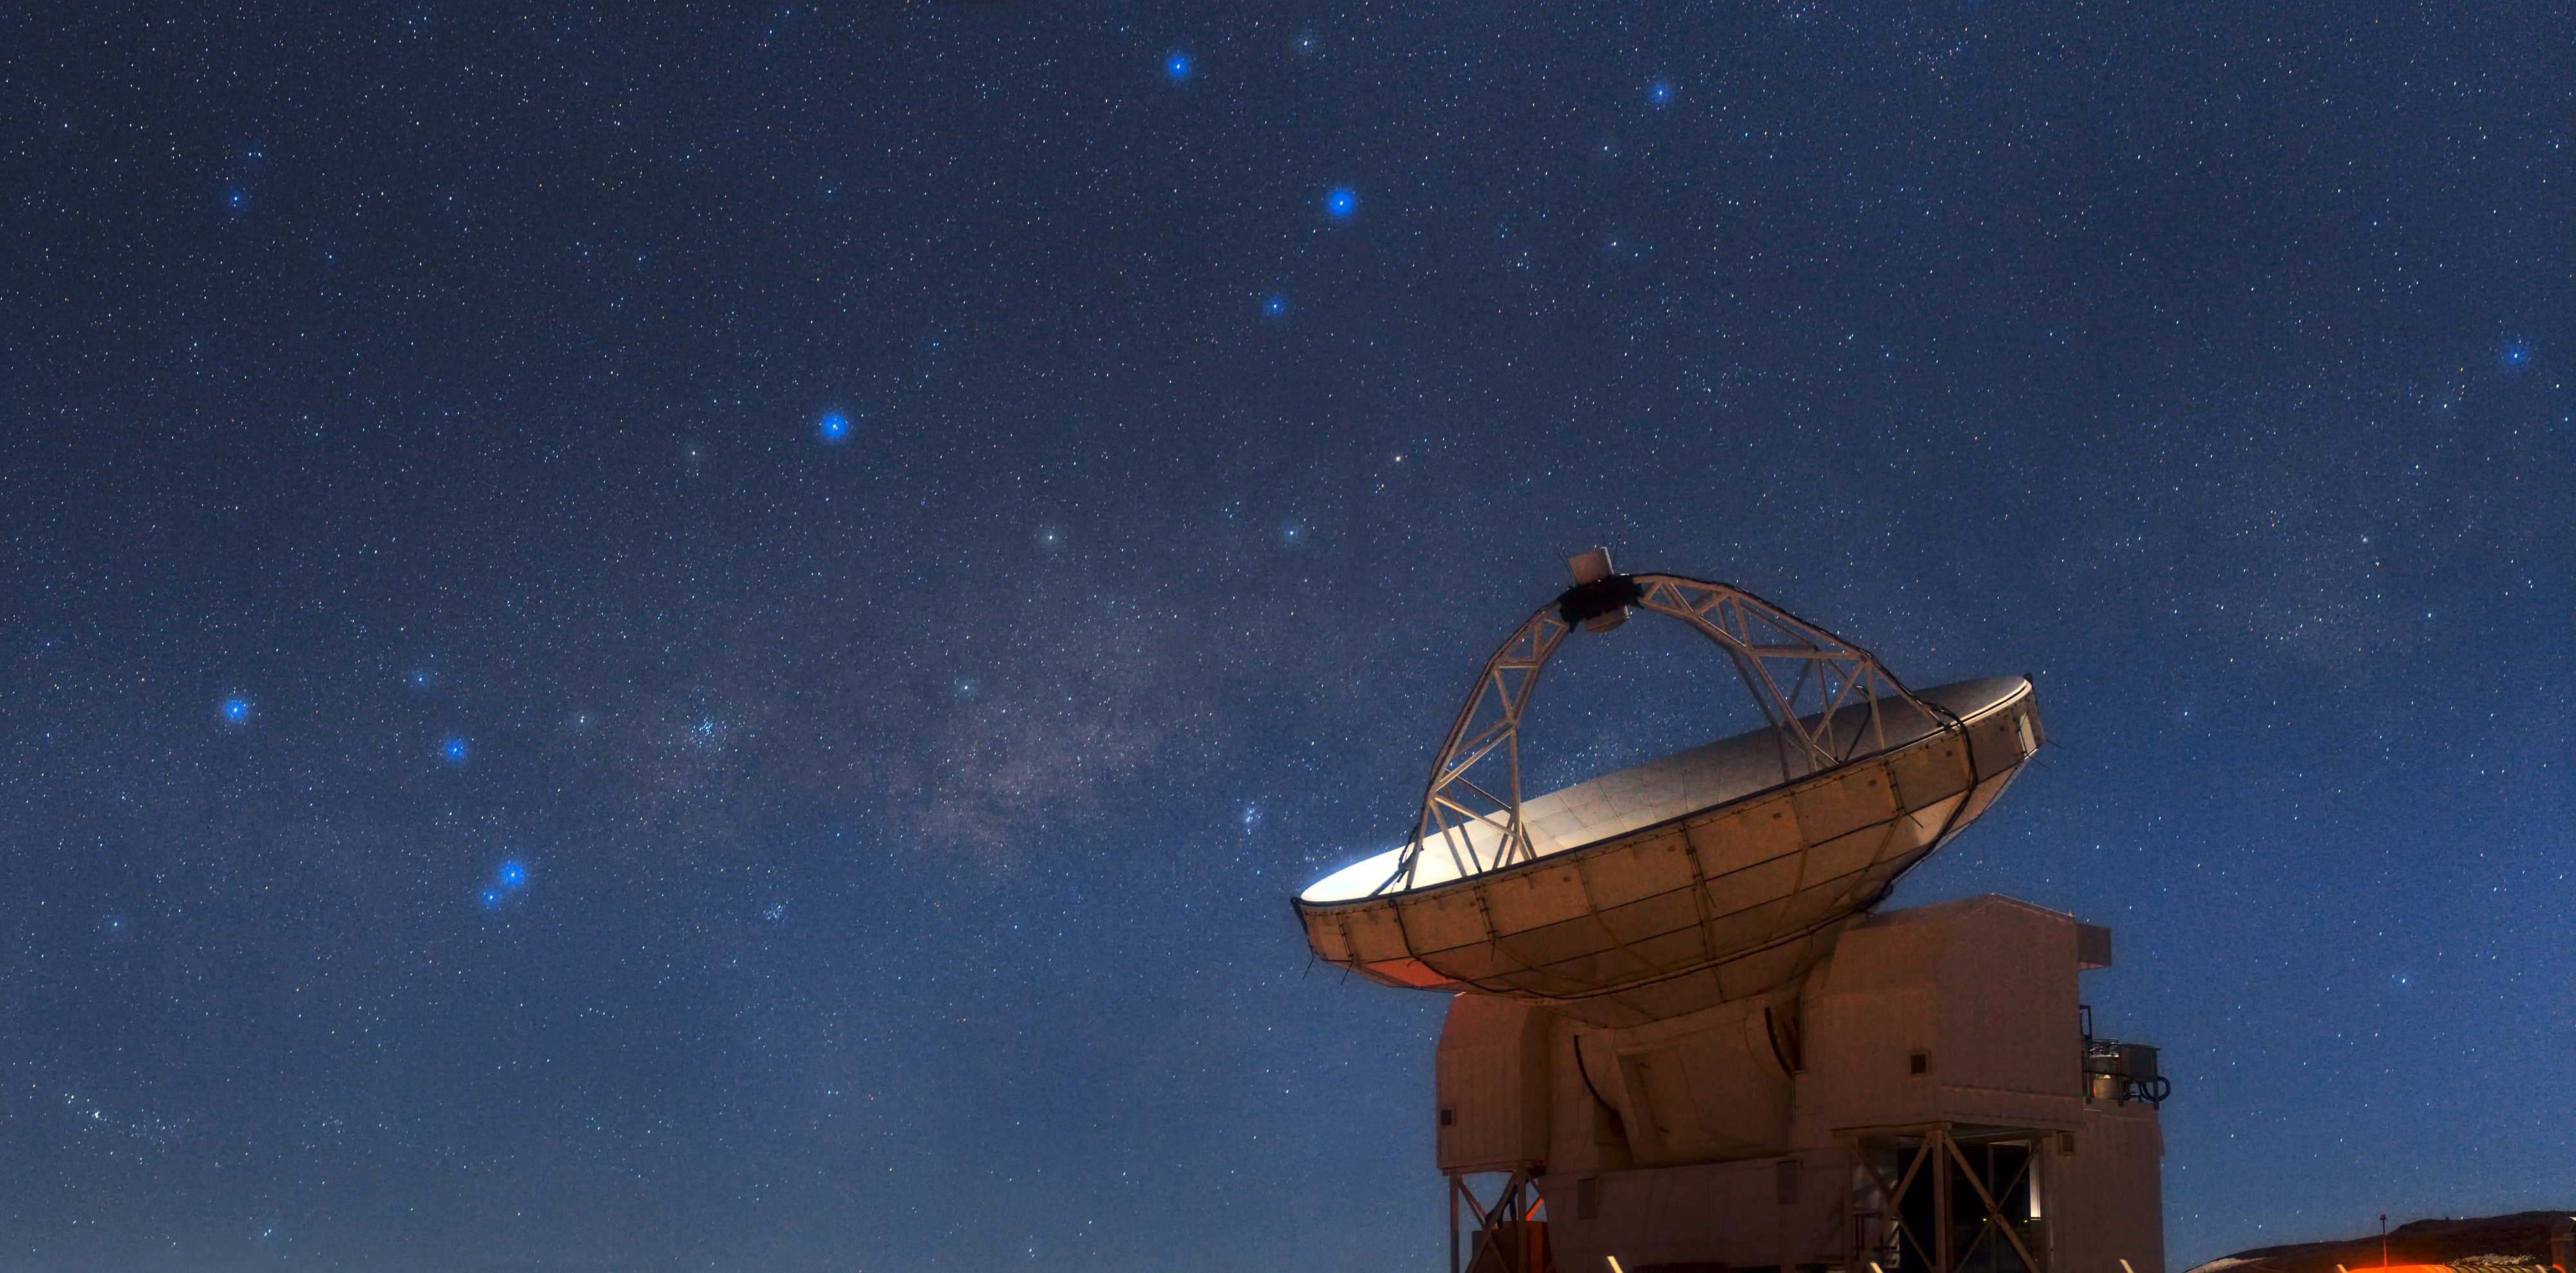 The Atacama Pathfinder Experiment (APEX) telescope looks skyward during a bright, moonlit night on Chajnantor, one of the highest and driest observatory sites in the world. Astronomical treasures fill the sky above the telescope, a testament to the excellent conditions offered by this site in Chile’s Atacama region. On the left shine the stars that make up the tail of the constellation of Scorpius (The Scorpion). The scorpion’s “stinger” is represented by the two bright stars that are particularly close to each other. Reaching across the sky and looking like a band of faint, glowing clouds is the plane of the Milky Way. Between Scorpius and the next constellation to the right, Sagittarius (The Archer), which looms over APEX’s dish, a sparkling cluster of stars can be clearly seen. This is the open cluster Messier 7, also known as Ptolemy’s Cluster. Below Messier 7 and slightly to the right is the Butterfly Cluster, Messier 6. Further to the right, just above the edge of APEX’s dish, is a faint cloud which looks like a bright smudge. This is the famous Lagoon Nebula (see eso0936 for a closer view). With a primary dish diameter of 12 metres, APEX is the largest single-dish submillimetre-wavelength telescope operating in the southern hemisphere. As the telescope’s name suggests, it is blazing a trail for the biggest submillimetre observatory in the world, the Atacama Large Millimeter/submillimeter Array (ALMA), which will be completed in 2013 (eso1137). APEX will share space with the 66 antennas of ALMA on the 5000-metre-high Chajnantor plateau in Chile. The APEX telescope is based on a prototype antenna constructed for the ALMA project, and it will find many targets that ALMA will be able to study in great detail. ESO Photo Ambassador Babak Tafreshi made this panorama using a telephoto lens. Babak is also the founder of The World At Night, a programme to create and exhibit a collection of stunning photographs and time-lapse videos of the world’s most beautiful and historic sites against a nighttime backdrop of stars, planets and celestial events. More information APEX is a collaboration between the Max-Planck-Institut für Radioastronomie (MPIfR), the Onsala Space Observatory (OSO), and ESO, with operations of the telescope entrusted to ESO. ALMA, an international astronomy facility, is a partnership of Europe, North America and East Asia in cooperation with the Republic of Chile. ALMA construction and operations are led on behalf of Europe by ESO, on behalf of North America by the National Radio Astronomy Observatory (NRAO), and on behalf of East Asia by the National Astronomical Observatory of Japan (NAOJ). The Joint ALMA Observatory (JAO) provides the unified leadership and management of the construction, commissioning and operation of ALMA. Links Information about APEX ESO Photo Ambassadors   #L